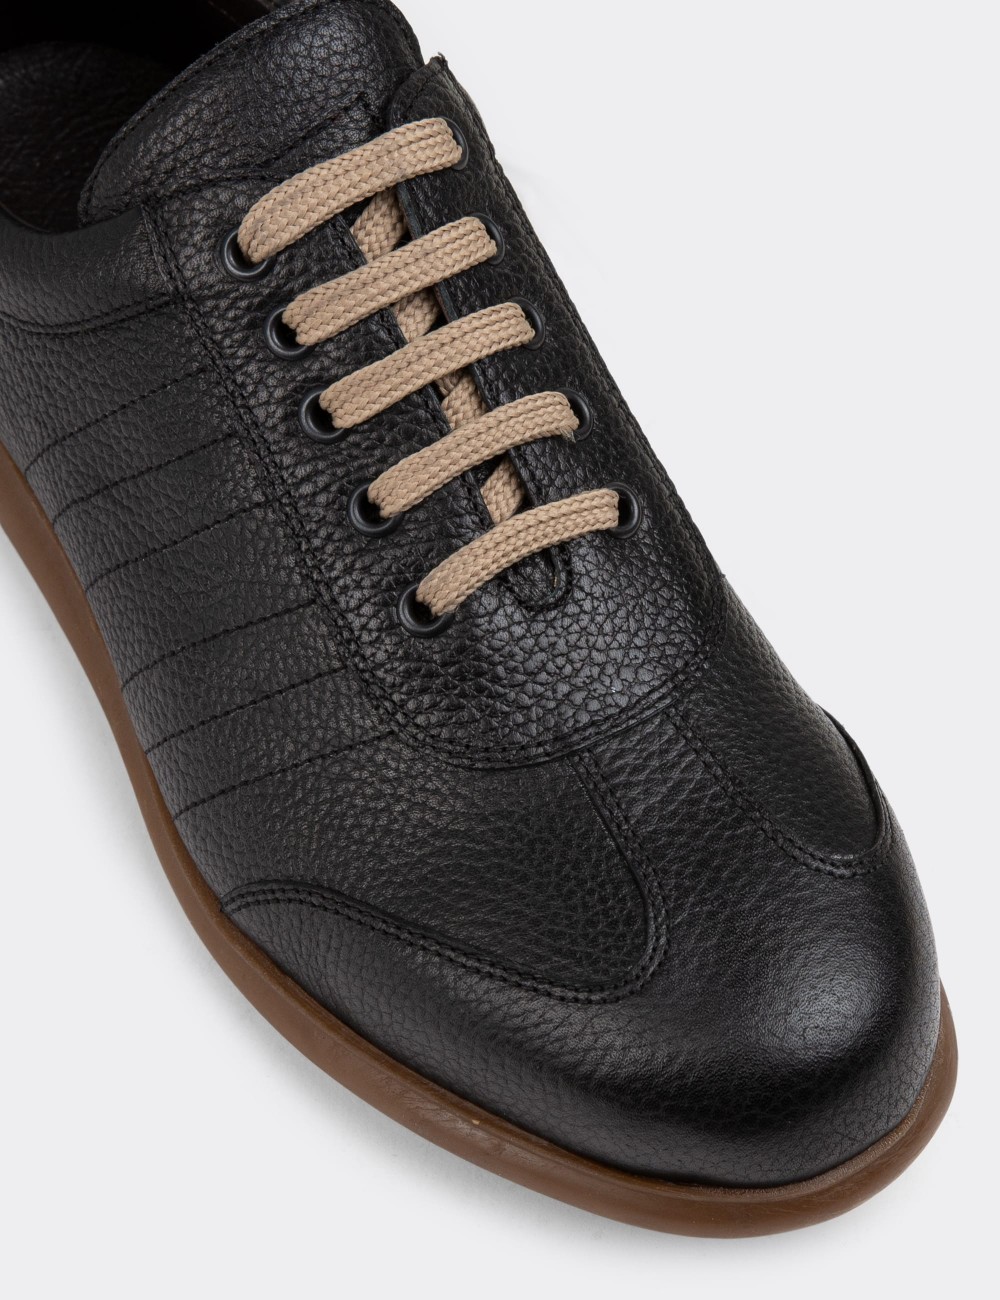 Black Leather Lace-up Shoes - 01826MSYHC07